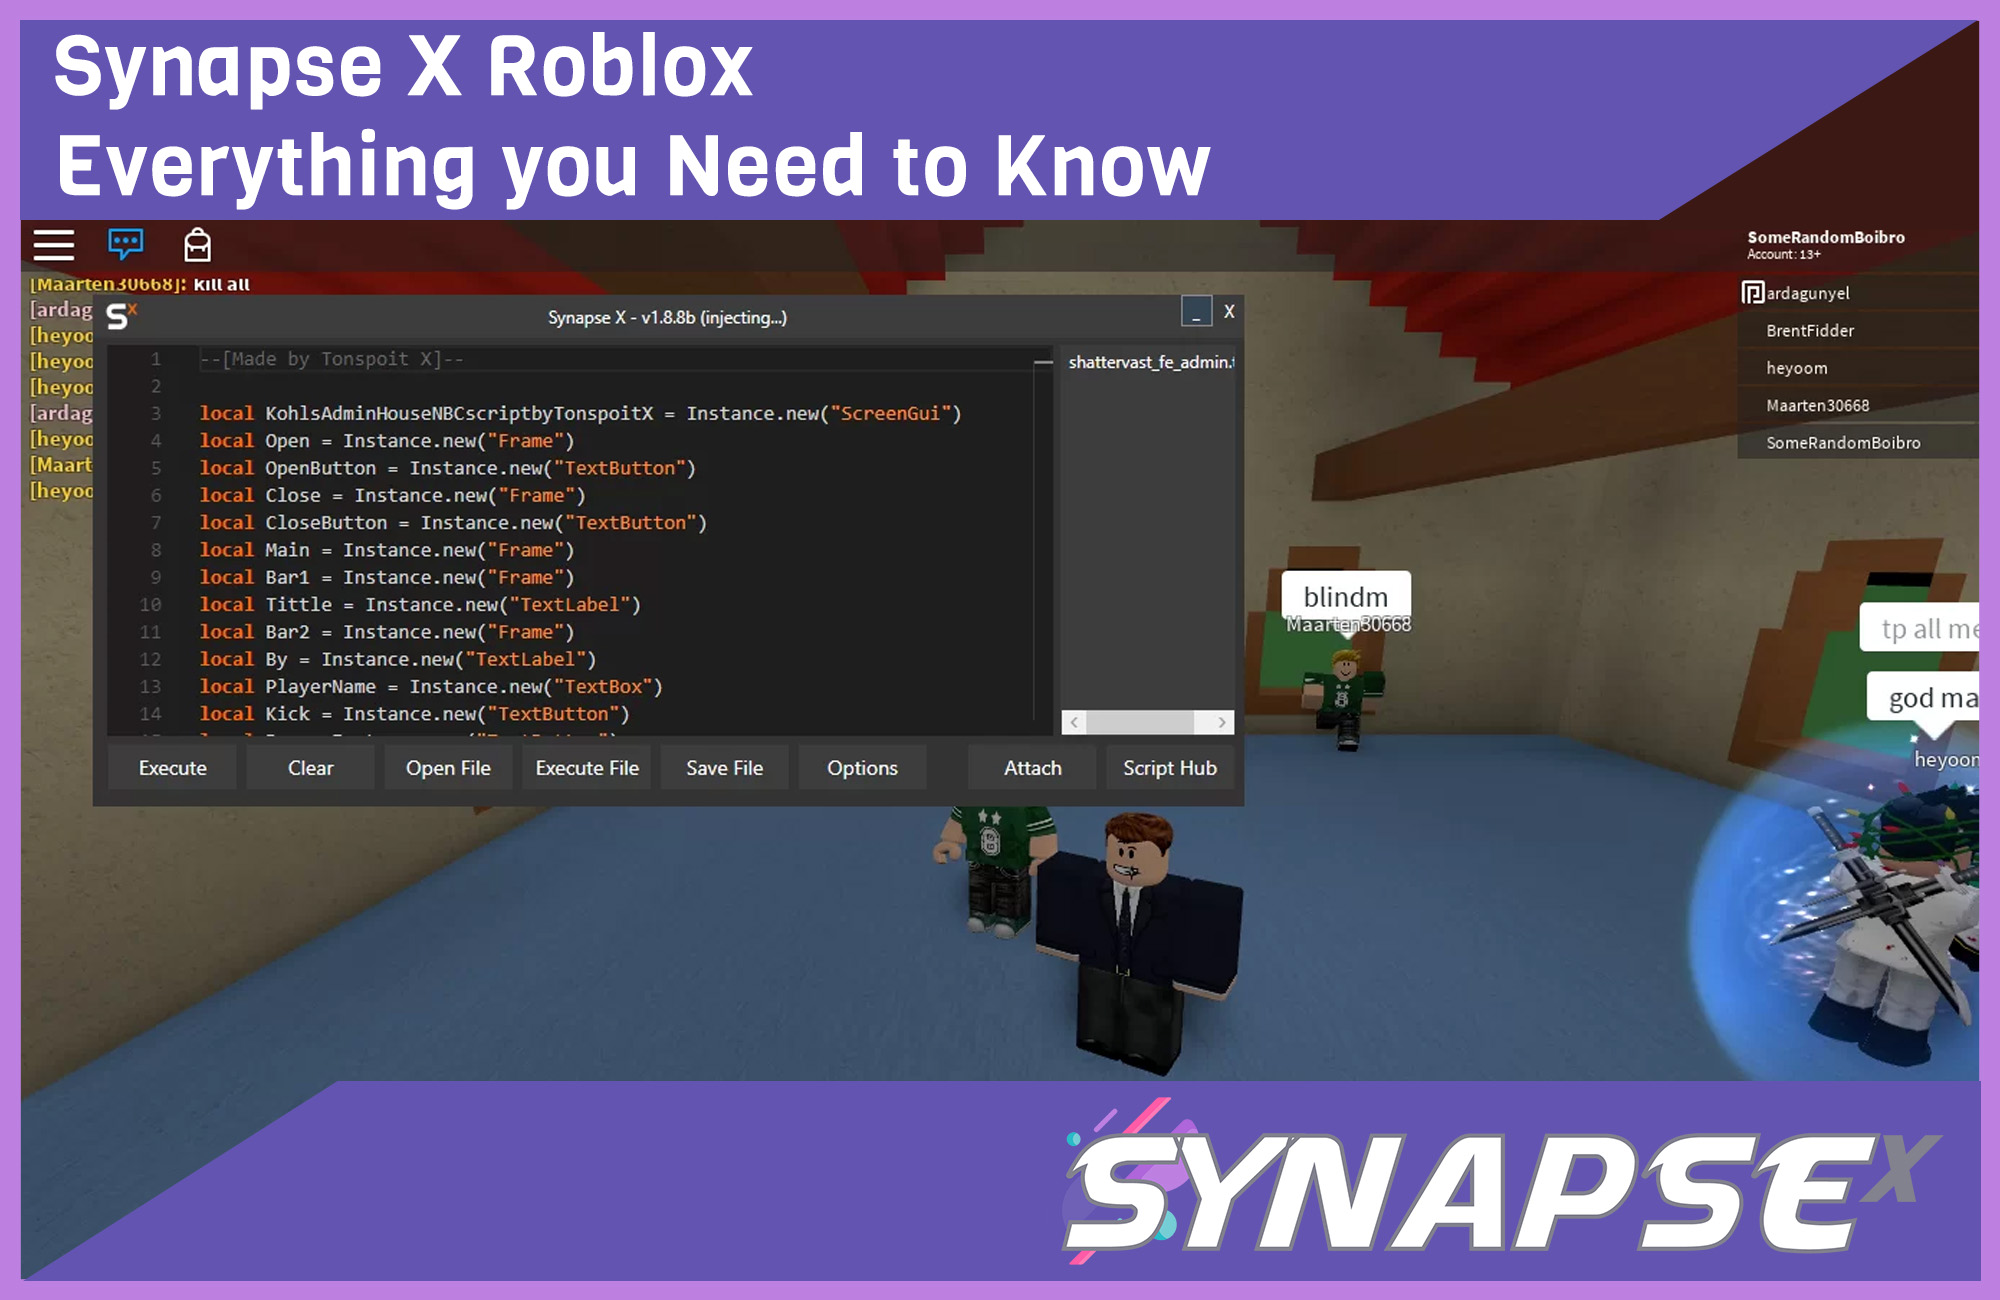 Synapse X Roblox – Everything you Need to Know